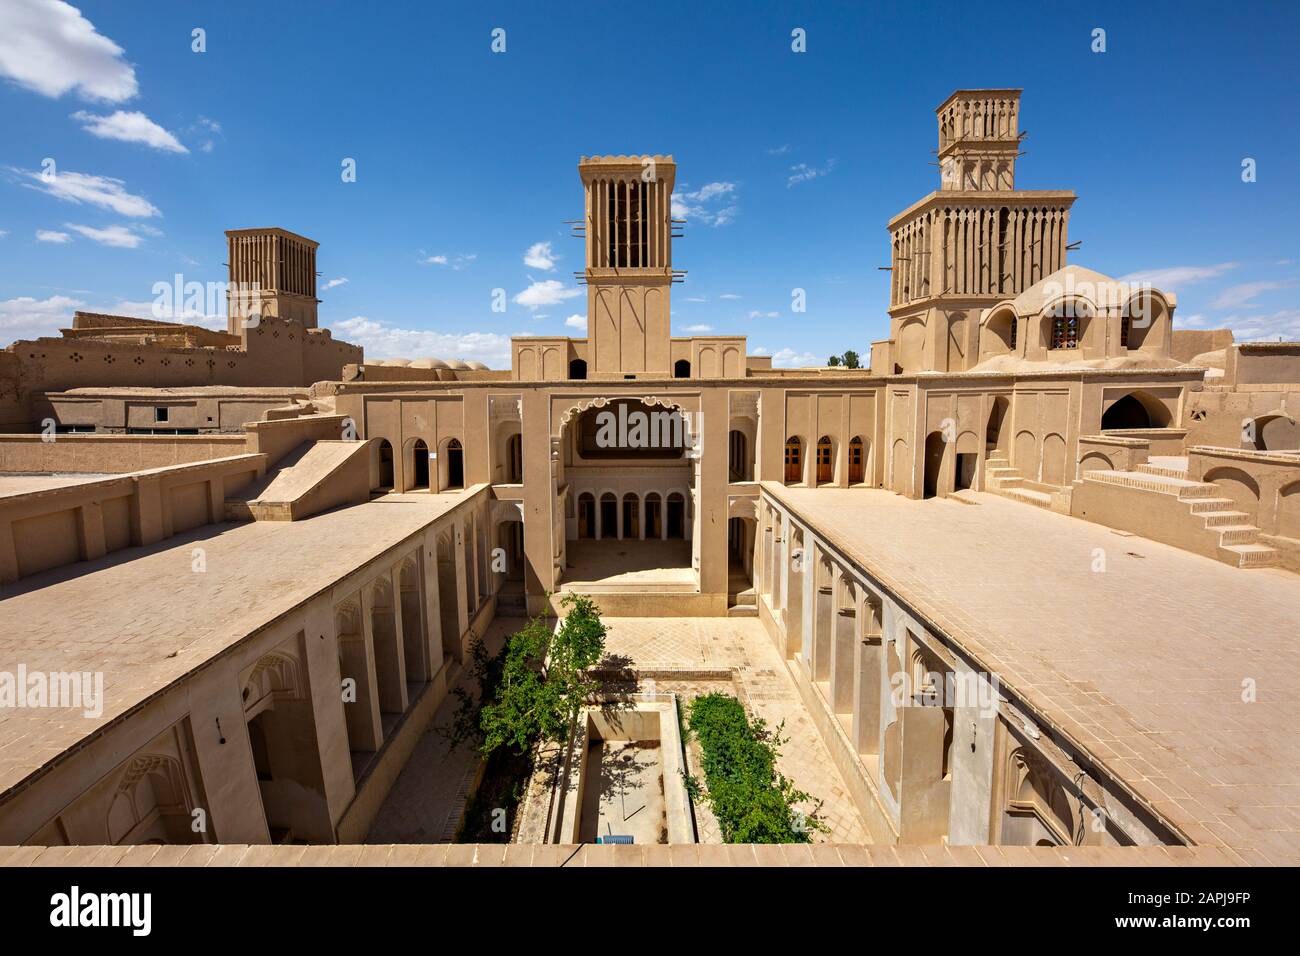 Historical house with wind towers in Abarkuh, Iran Stock Photo